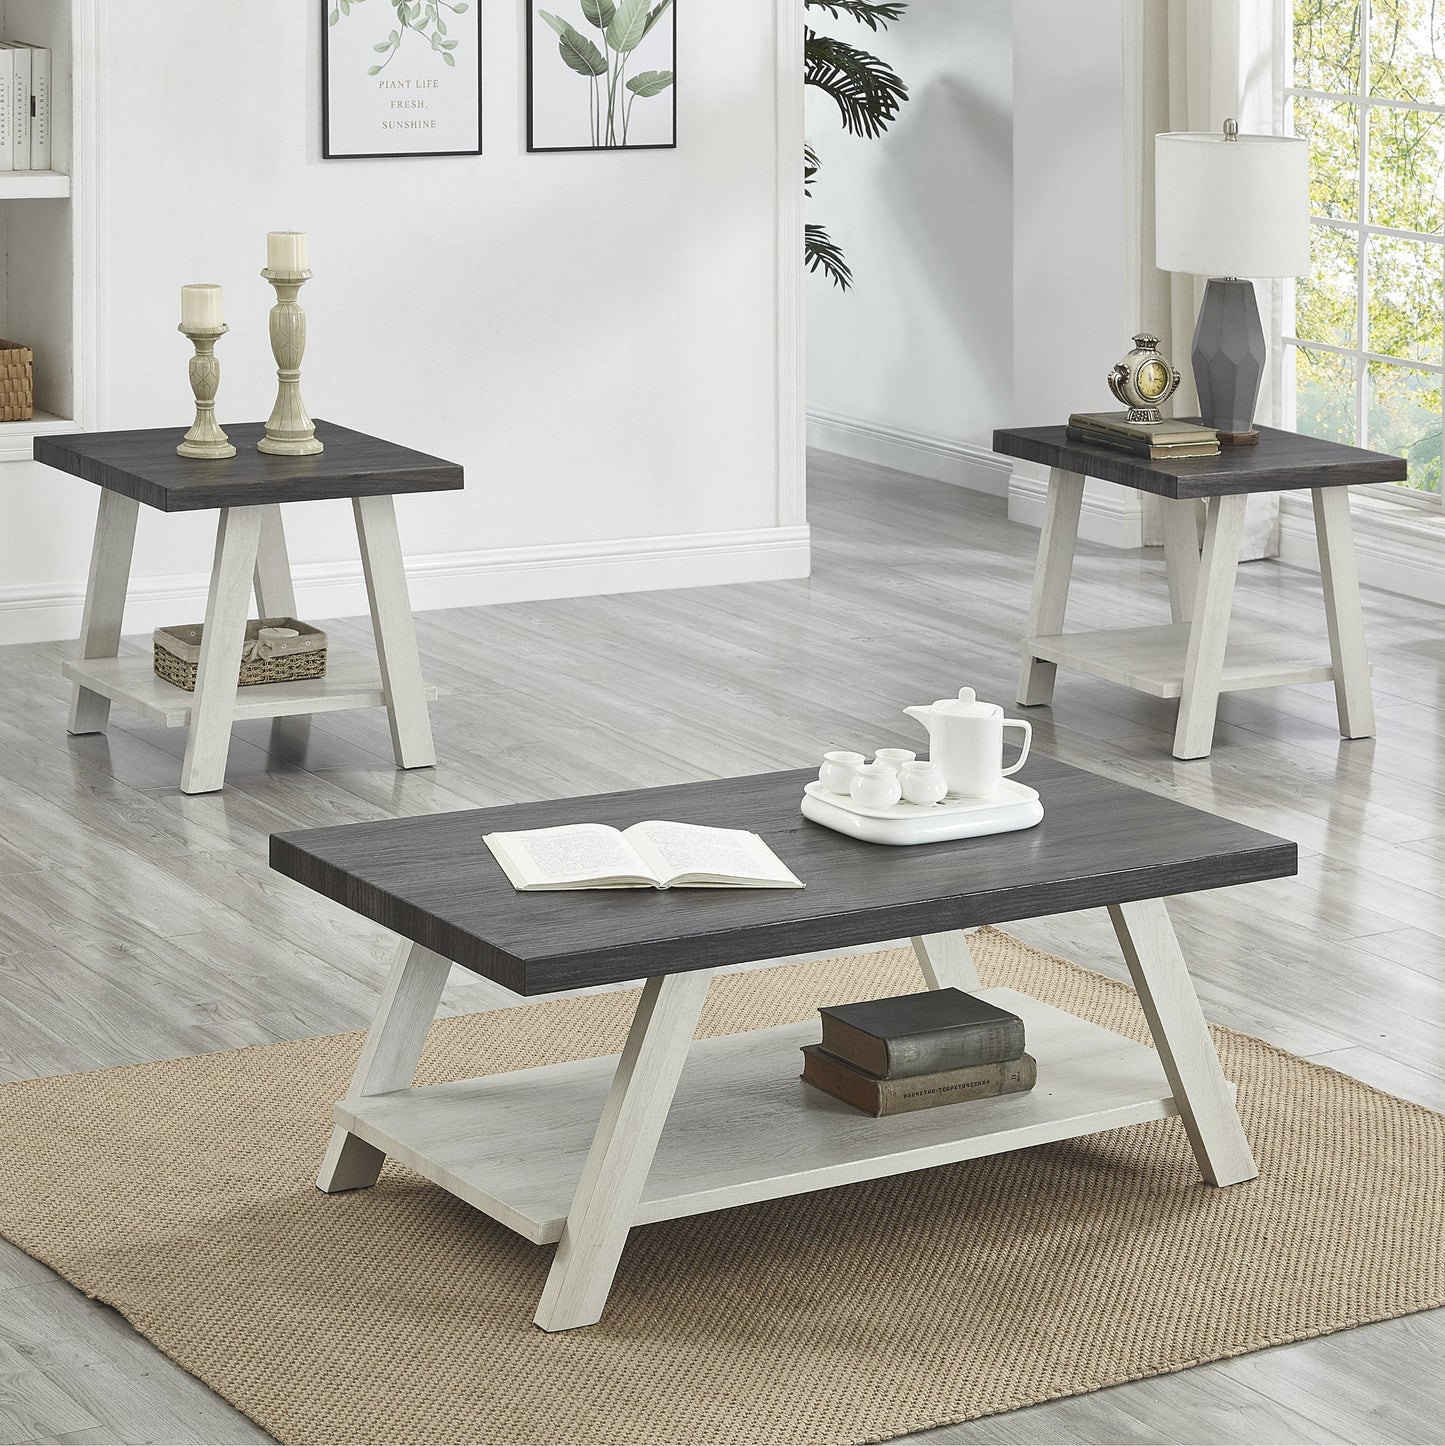 Athens Contemporary 3-Piece Wood Shelf Coffee Table Set in Weathered Charcoal and Beige